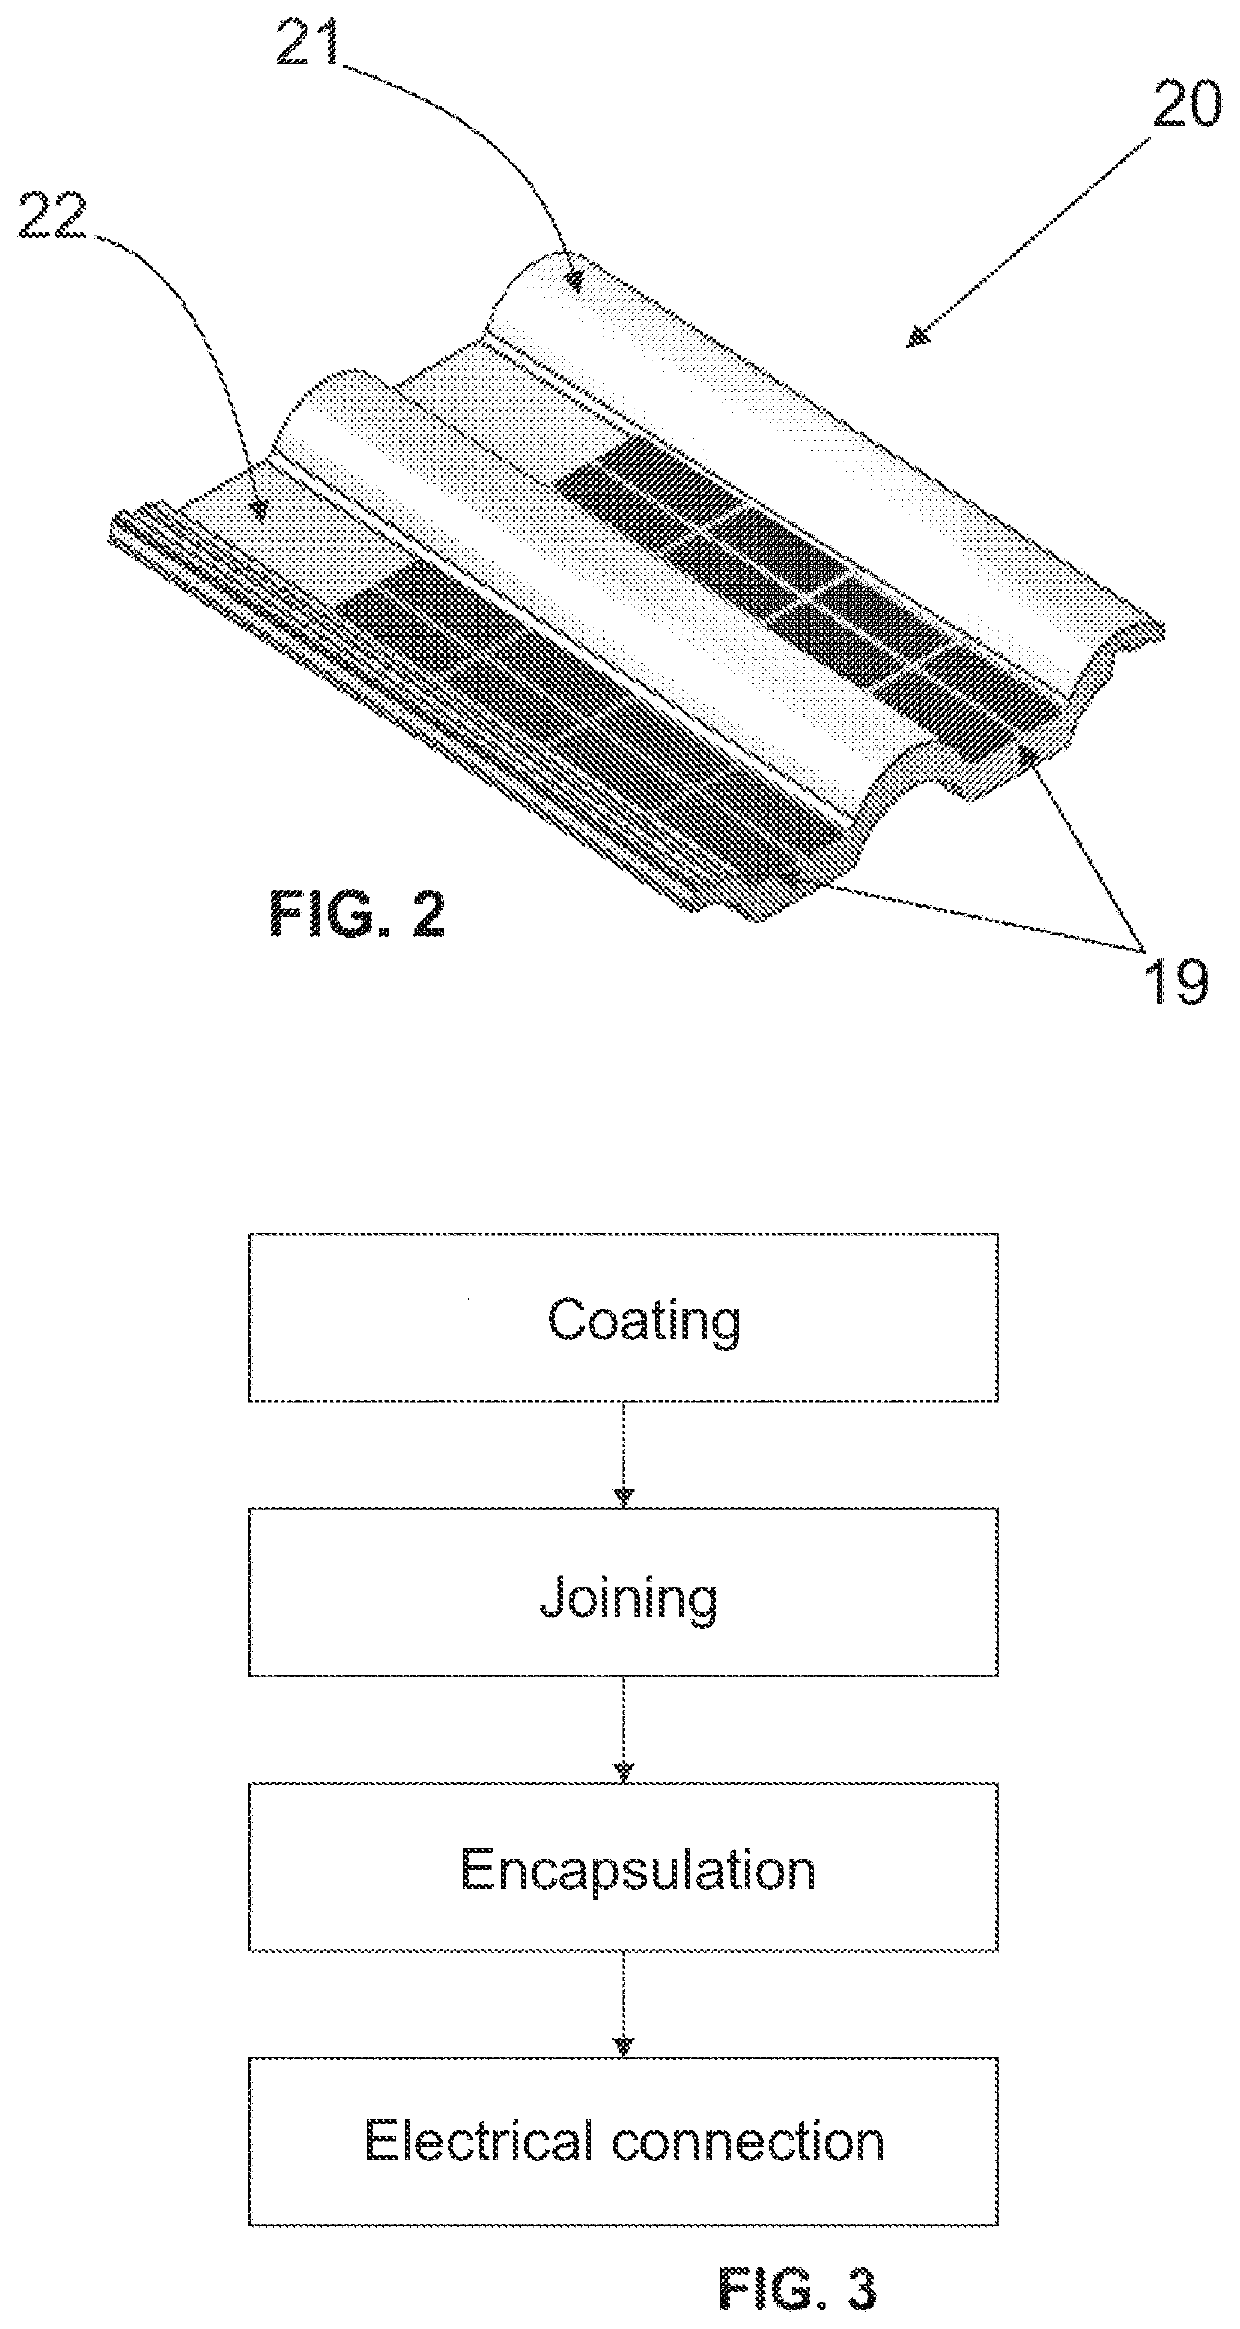 Photovoltaic cell, method for manufacturing an encapsulated photovoltaic cell, electrical connection unit for a photovoltaic tile, and photovoltaic tile